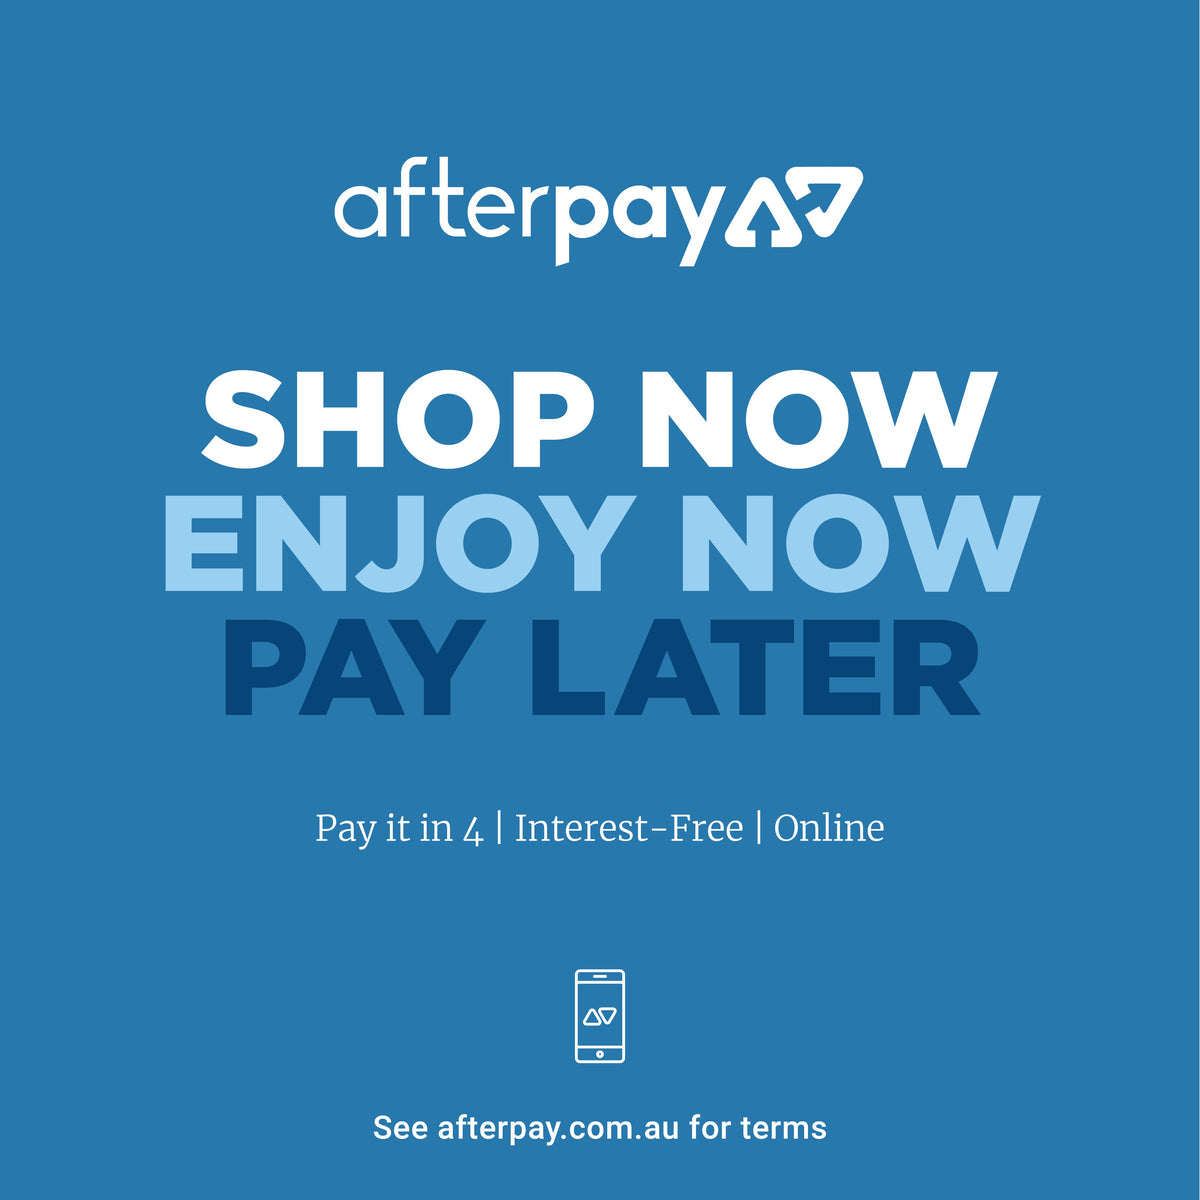 You can now buy Es Una with Afterpay